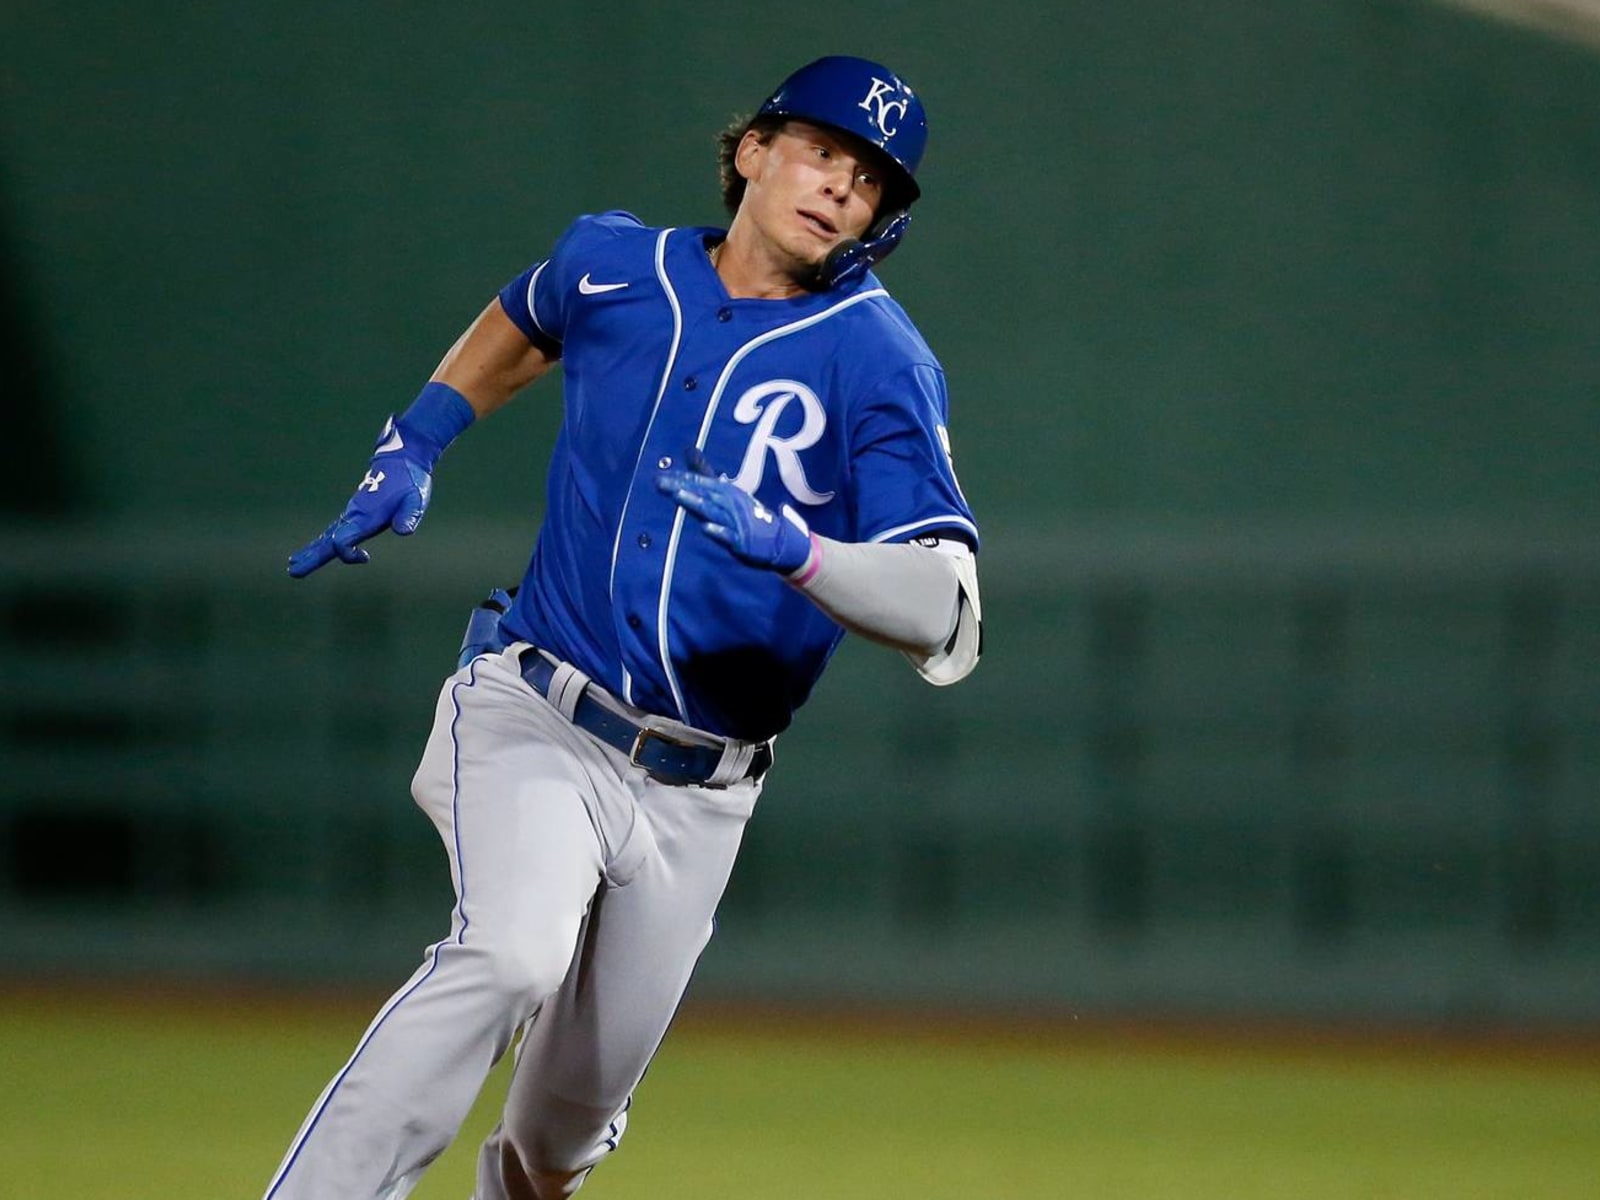 Interview with KC Royals prospect Nicky Lopez